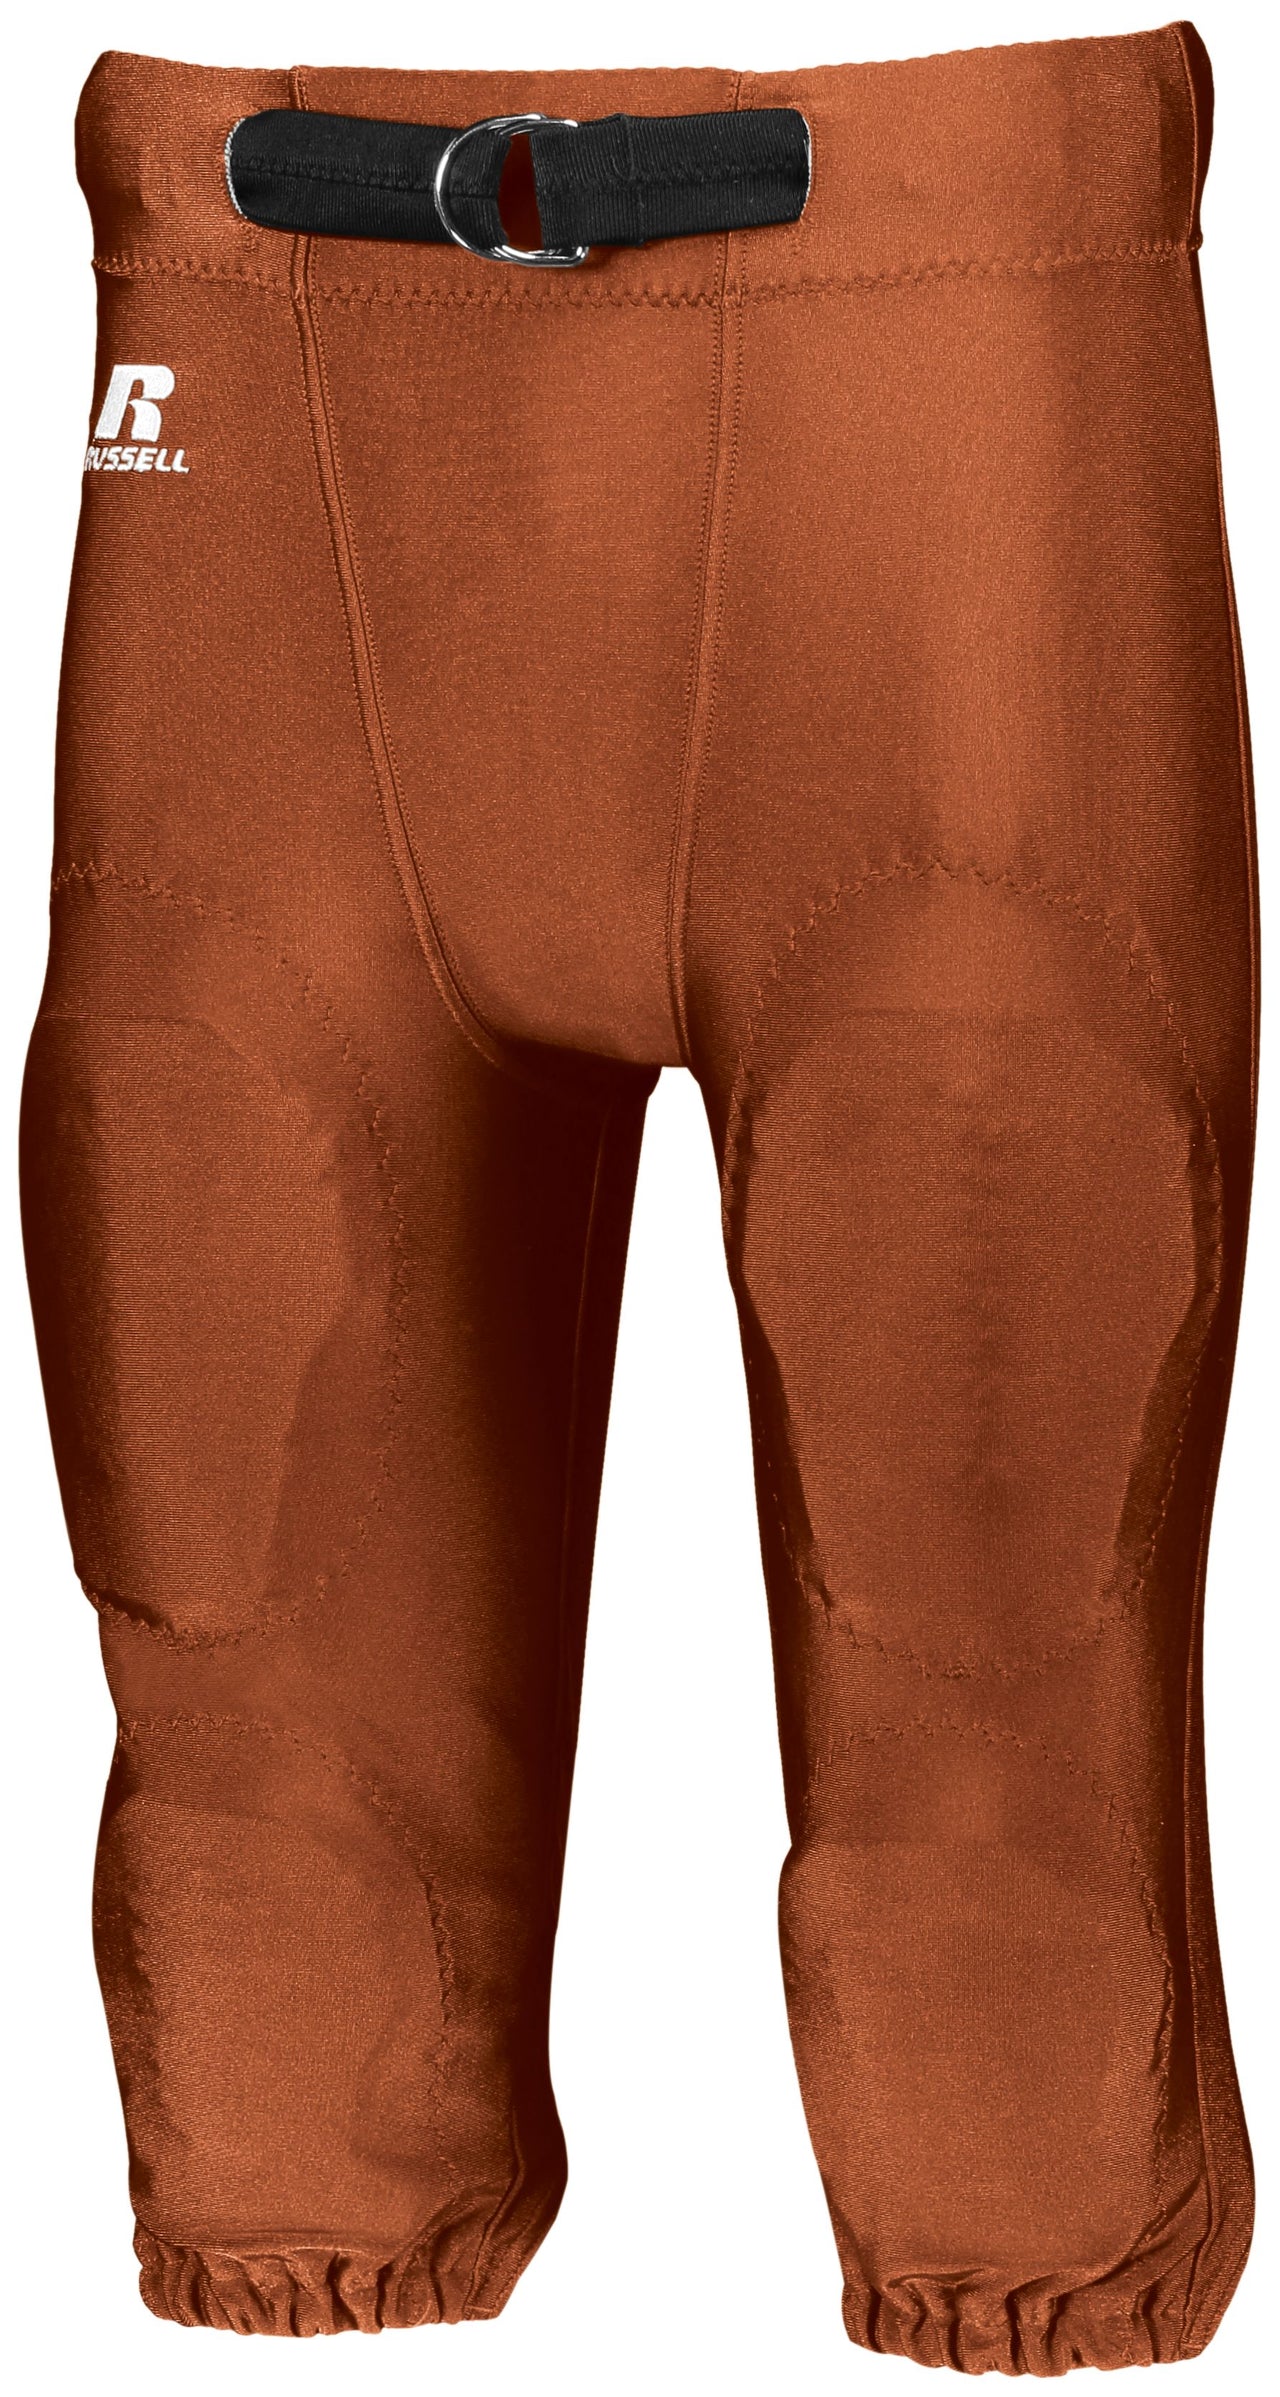 Deluxe Game Football Pant - F2562M